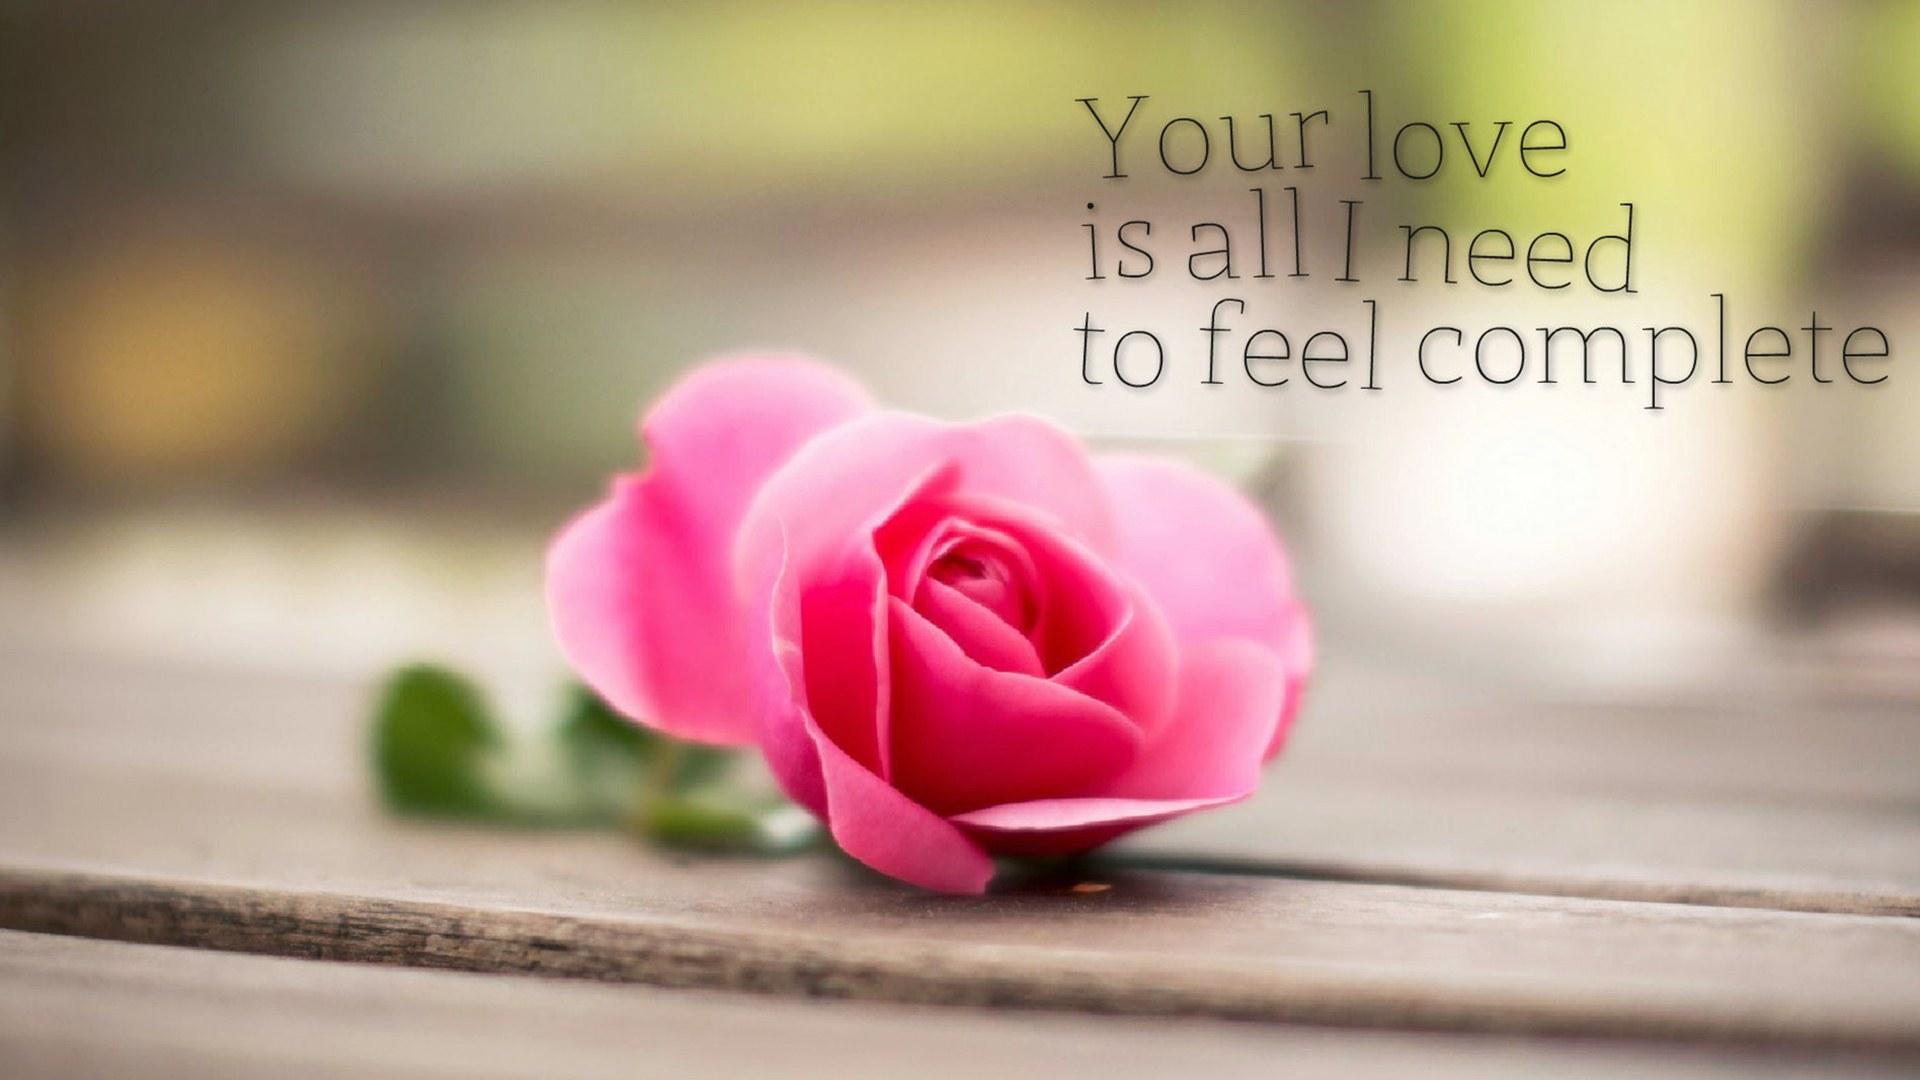 feel my love quotes wallpaper